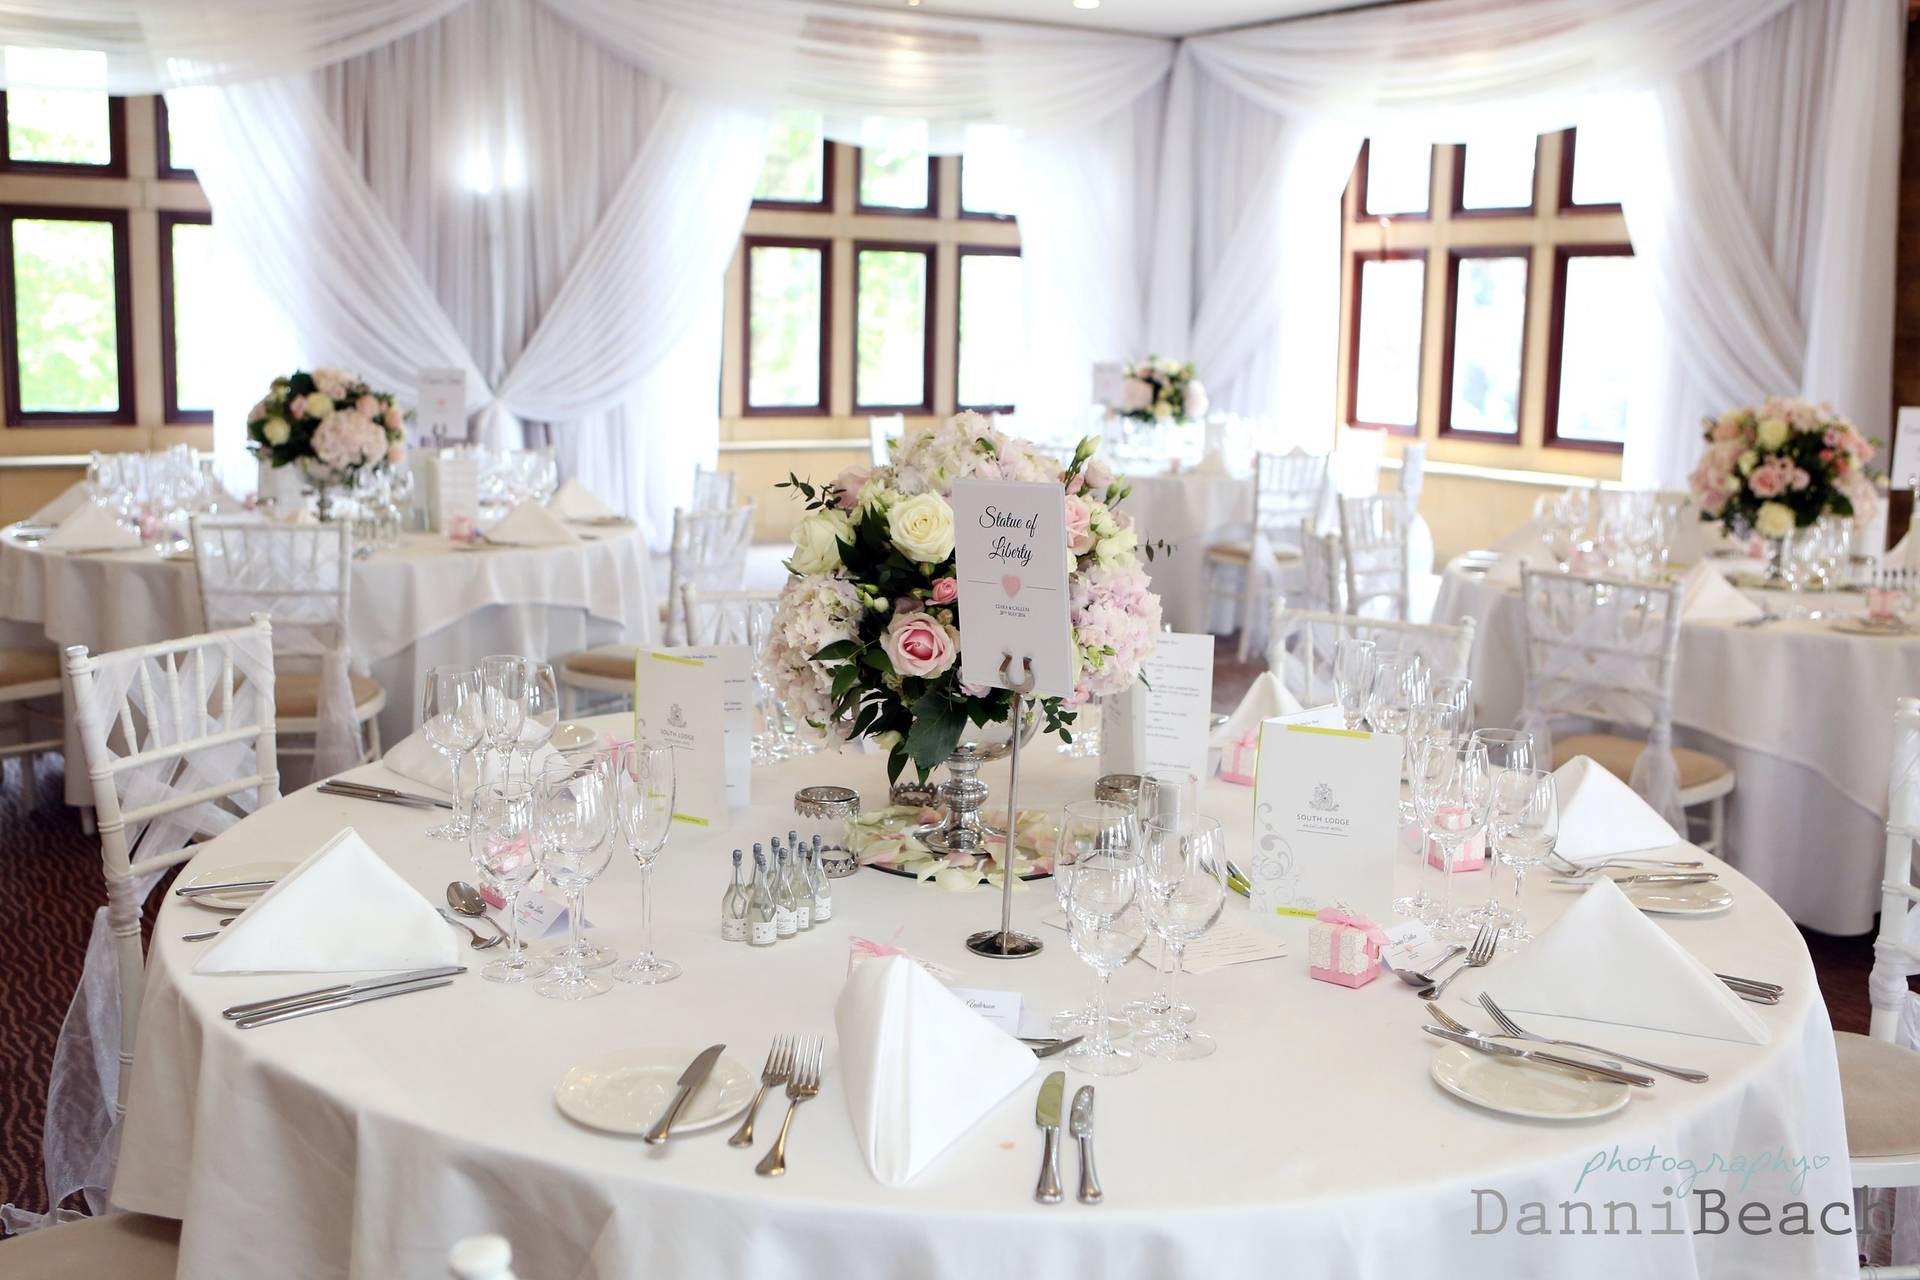 South Lodge Wedding Venue Lower Beeding, West Sussex | hitched.co.uk